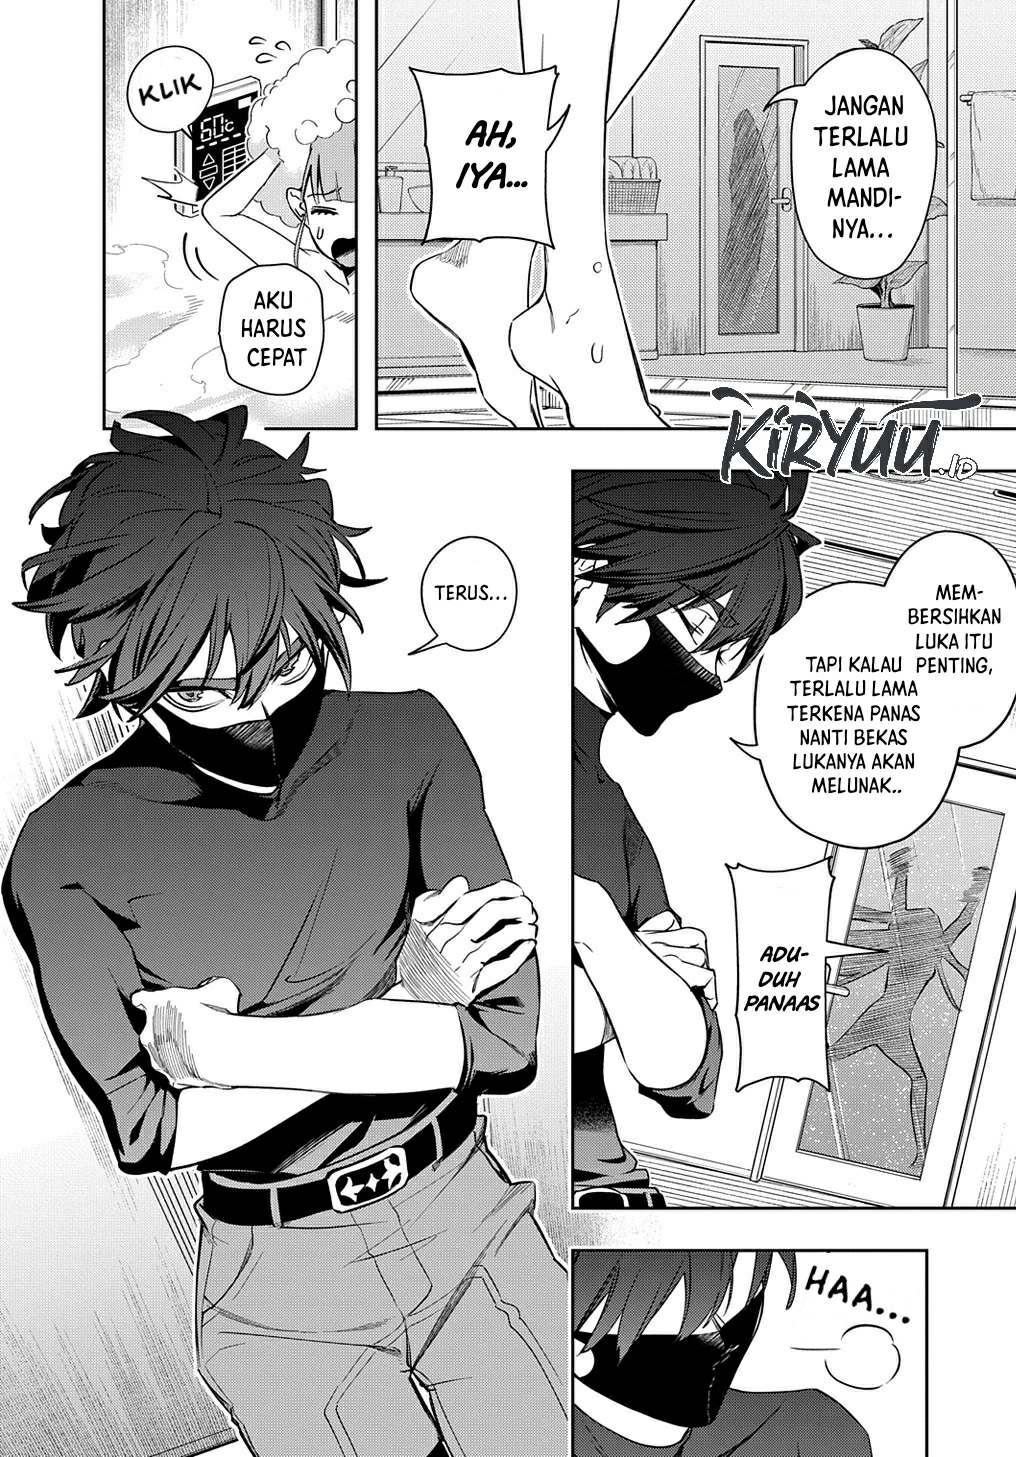 The Kingdoms of Ruin Chapter 39 Bahasa Indonesia